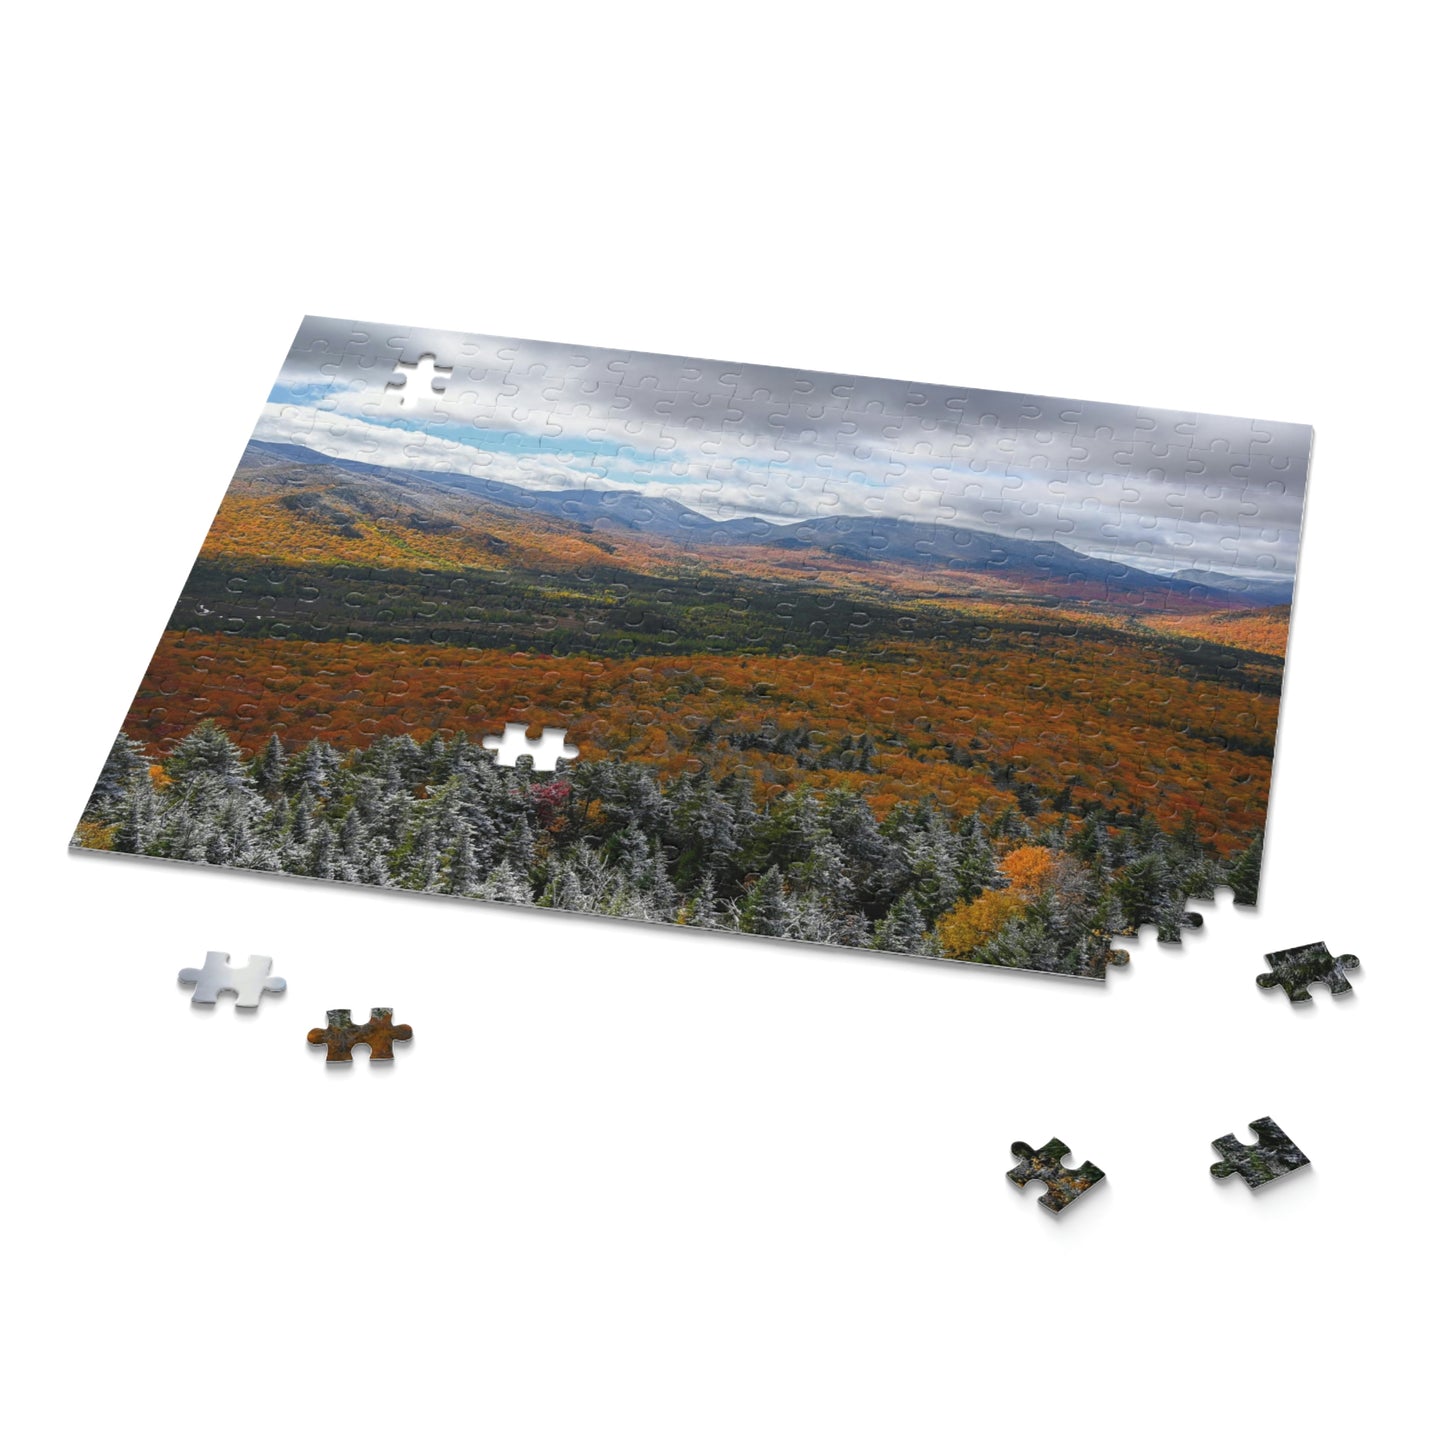 Puzzle - Frosty Fall Day, Mt. Van Hoevenberg